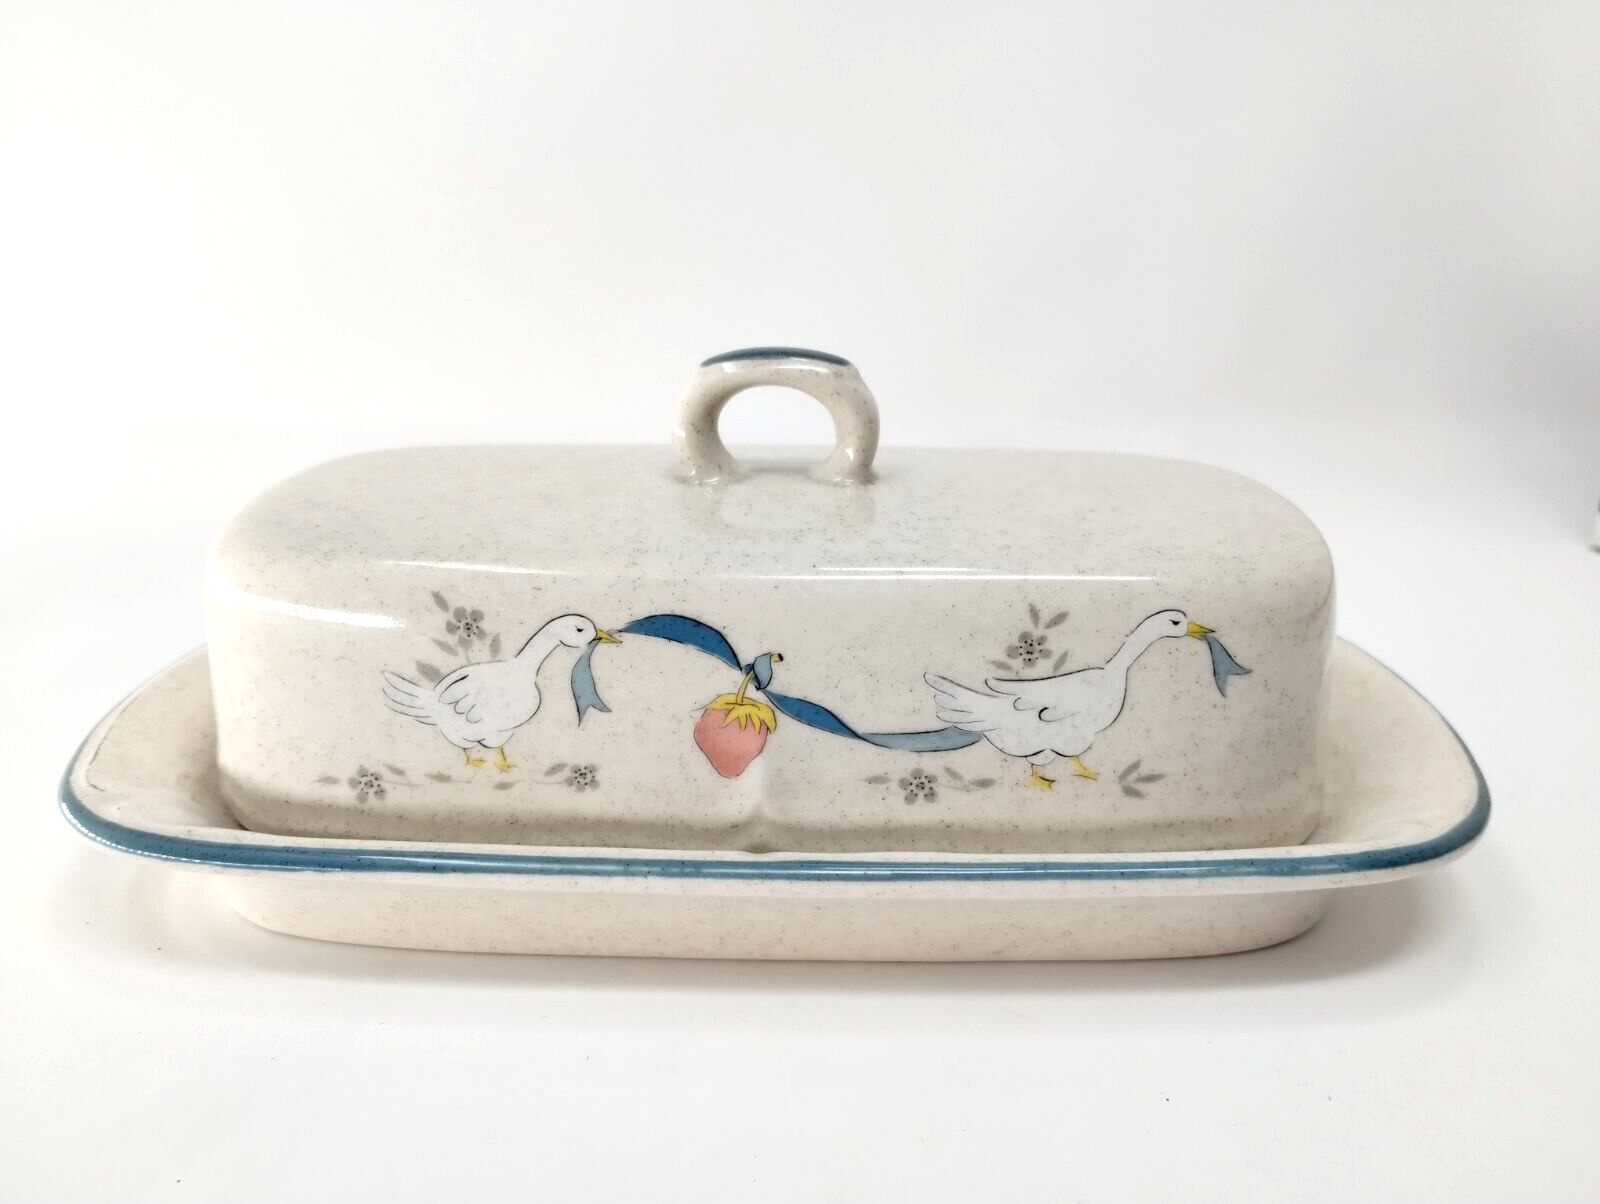 Vtg International China MARMALADE Geese Covered Butter Dish Retired Pattern